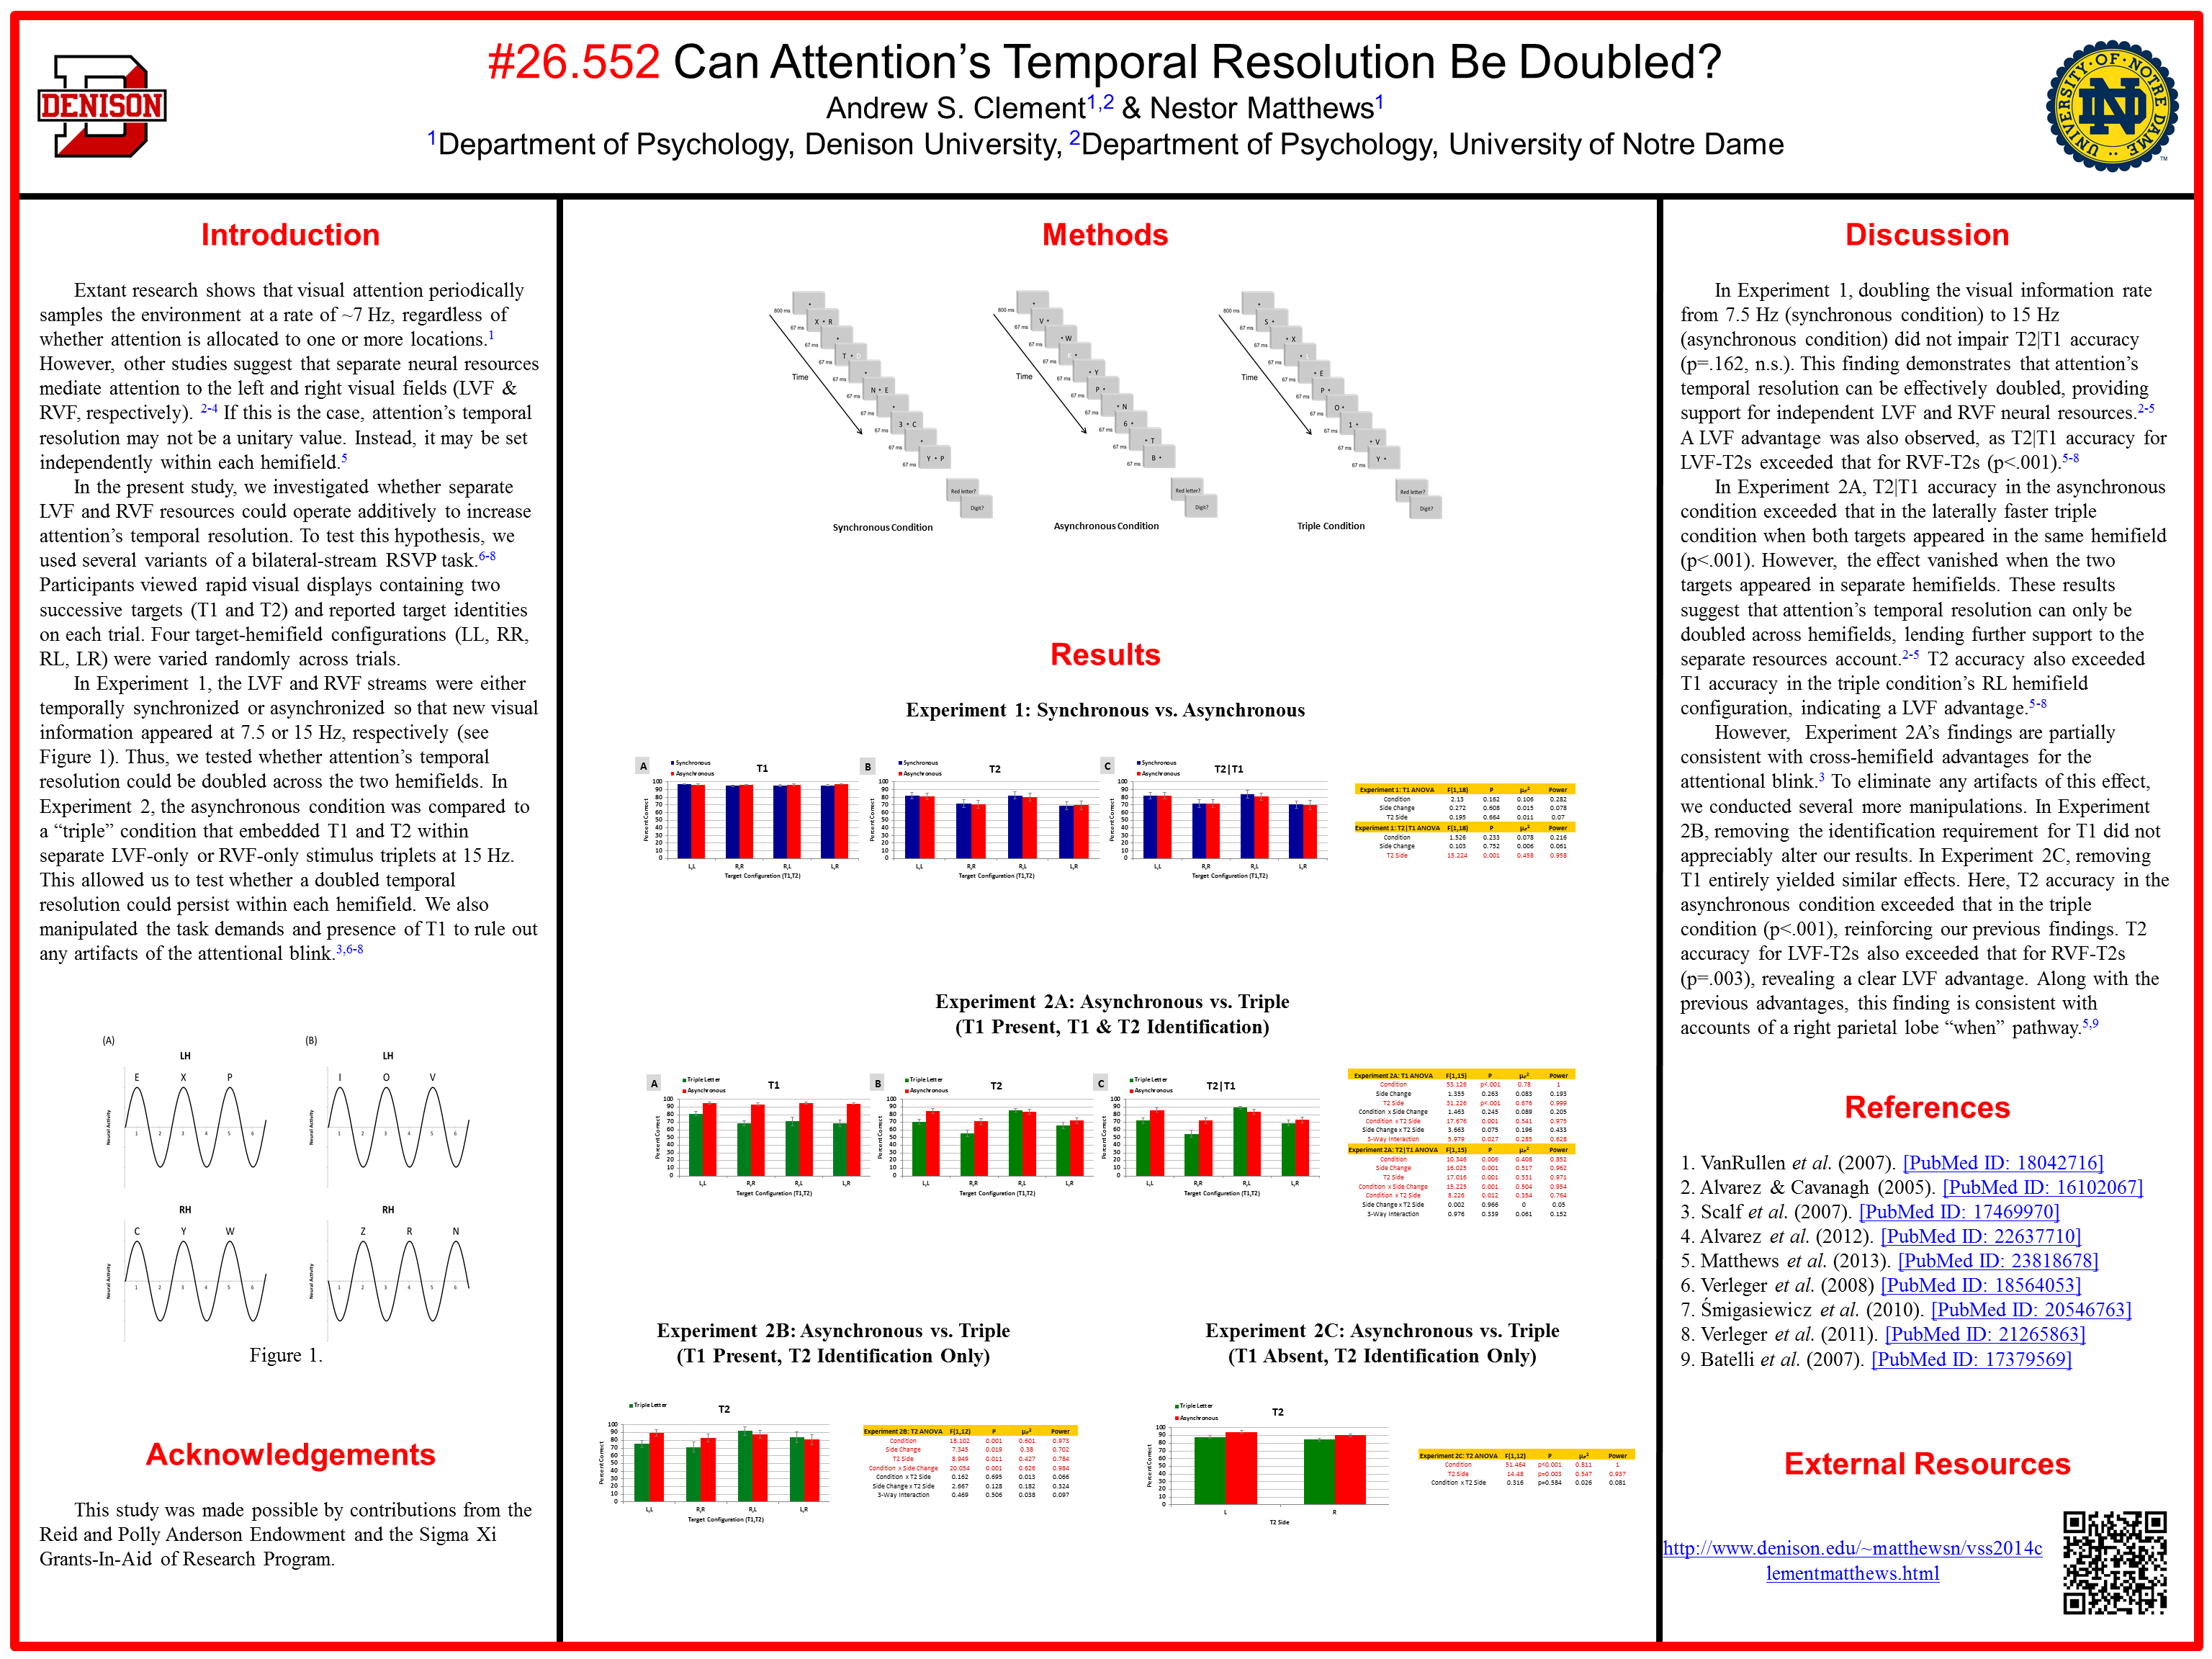 Can Attention's Temporal Resolution Be Doubled? VSS 2014